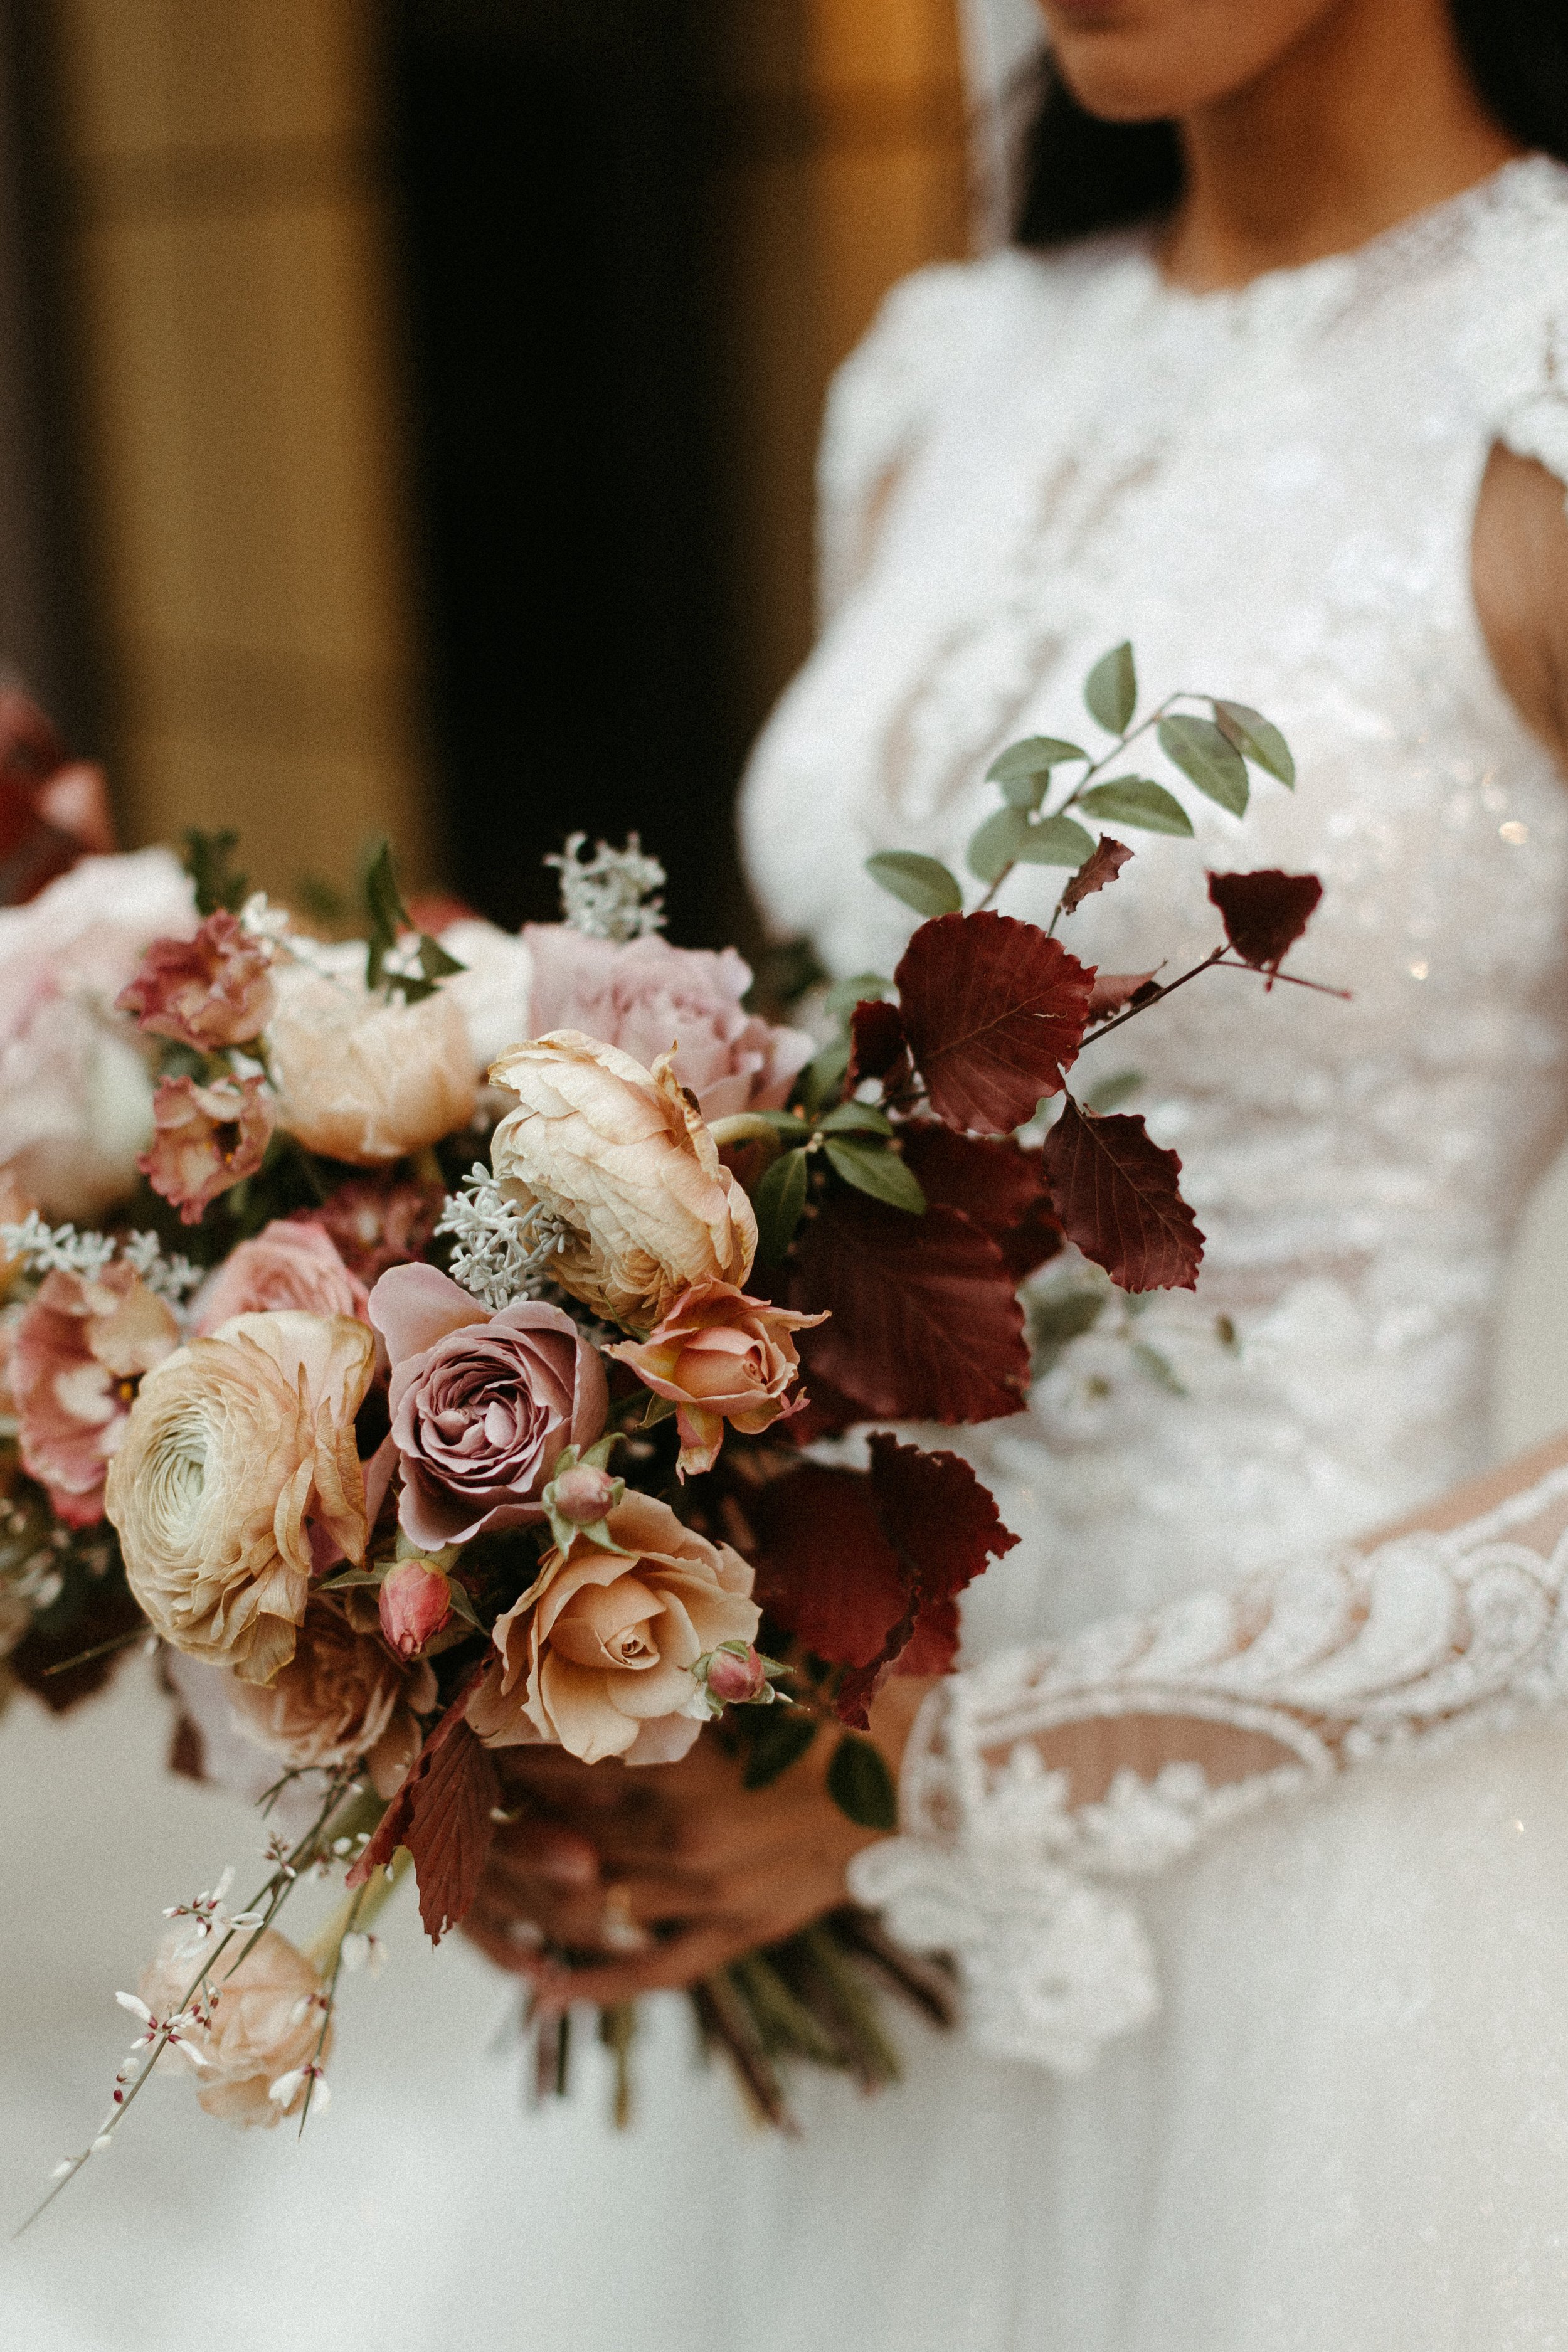 This elegant bridal bouquet brought hues of mauve, dusty pink, cream, burgundy, and terra cotta to this winter wedding. Lush with petal heavy roses, ranunculus, spray roses, copper beech, and greenery. Designed by Rosemary and Finch in Nashville, TN.